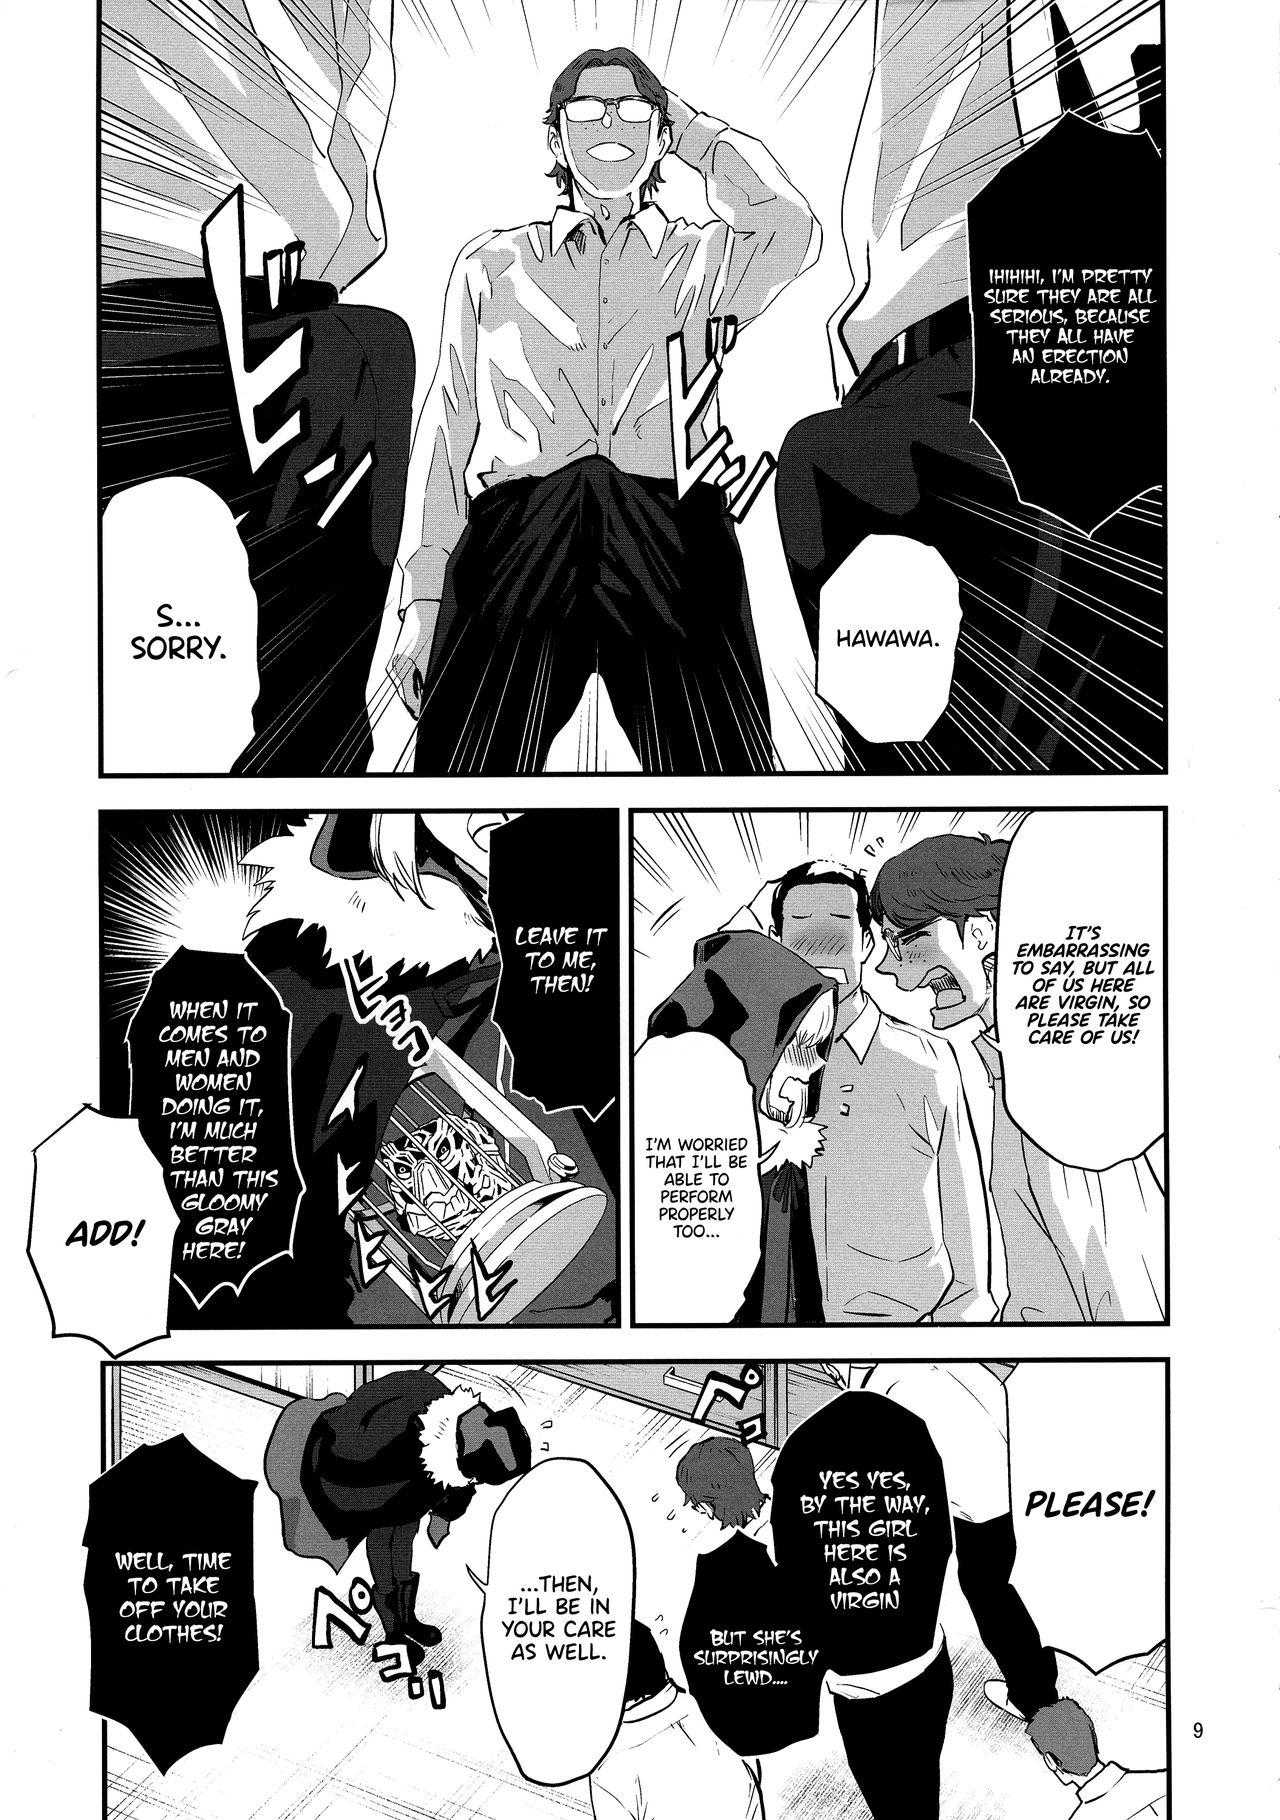 Fucked Hard Taking Advantage of Gray-chan Weakness, We Graduated from our Virginity. - Lord el-melloi ii sei no jikenbo Naked Sex - Page 9